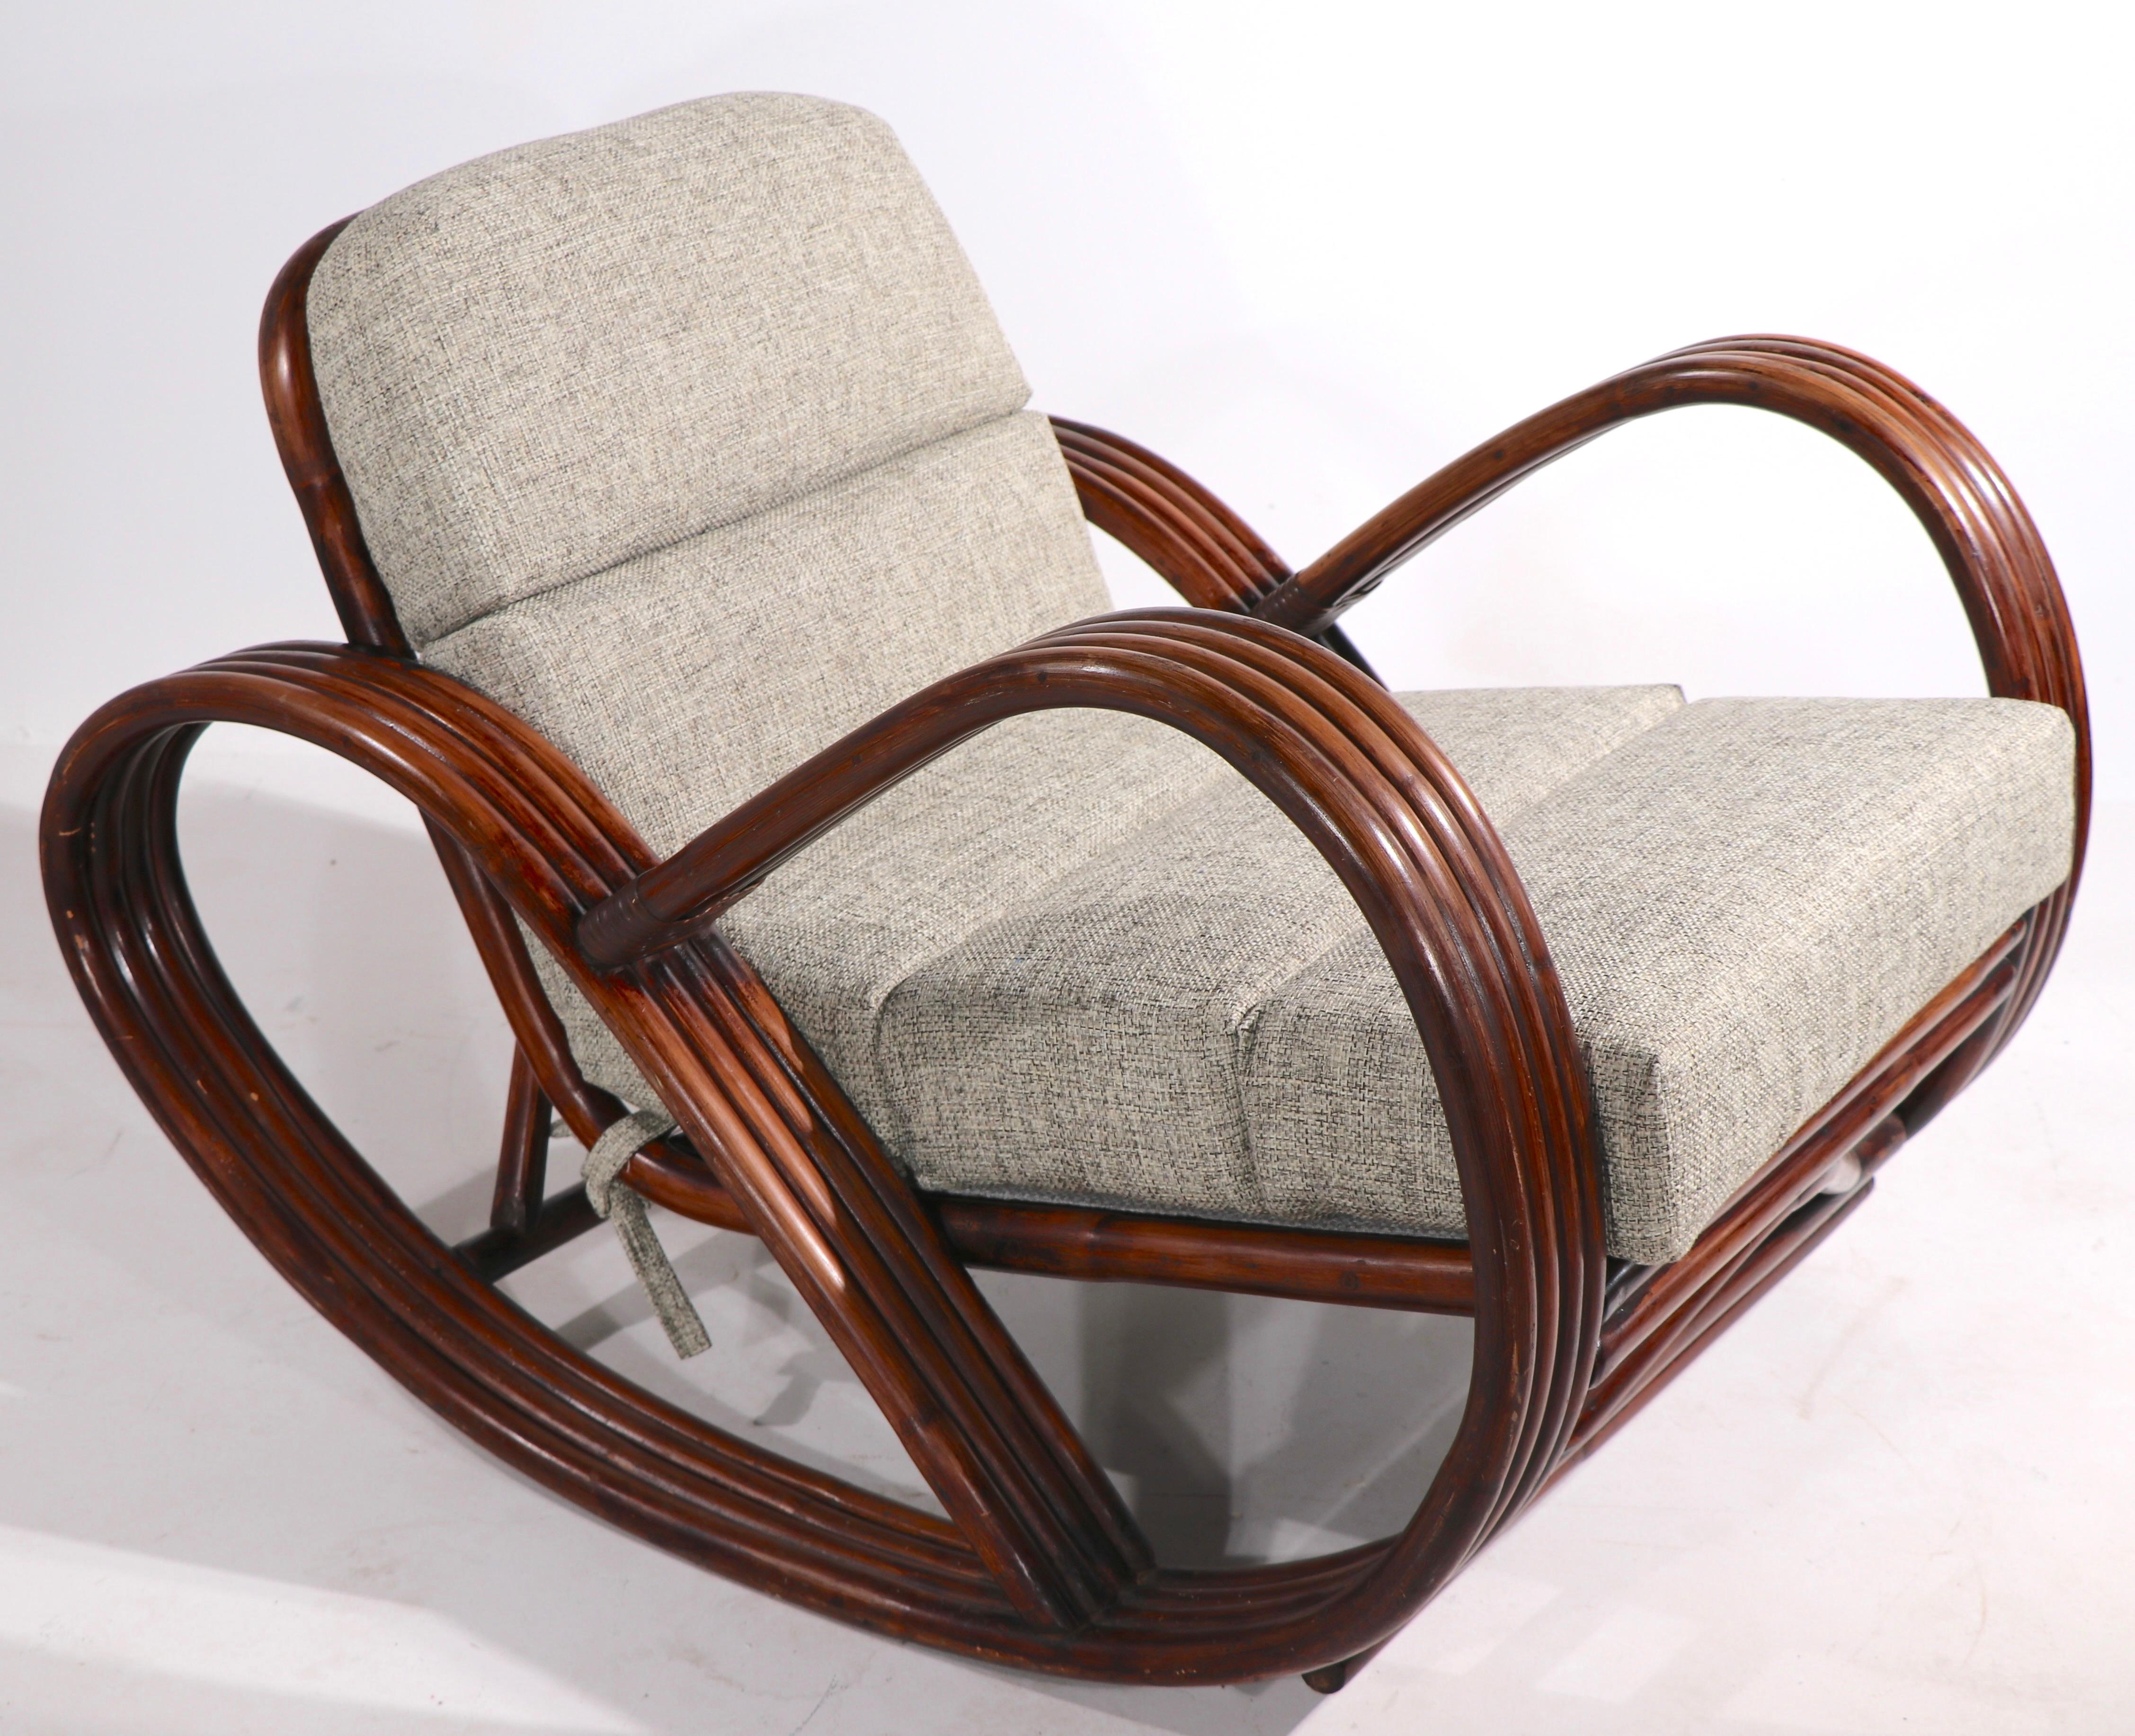 Chic, stylish and impressive four rung pretzel arm rocking, lounge chair in bamboo, with new gray tweed upholstery. Design reminiscent of Paul Frankl, circa 1940/1950's, clean ready to use condition. 
Measures: Total H 28 x Arm H 23.5 x Seat H 18